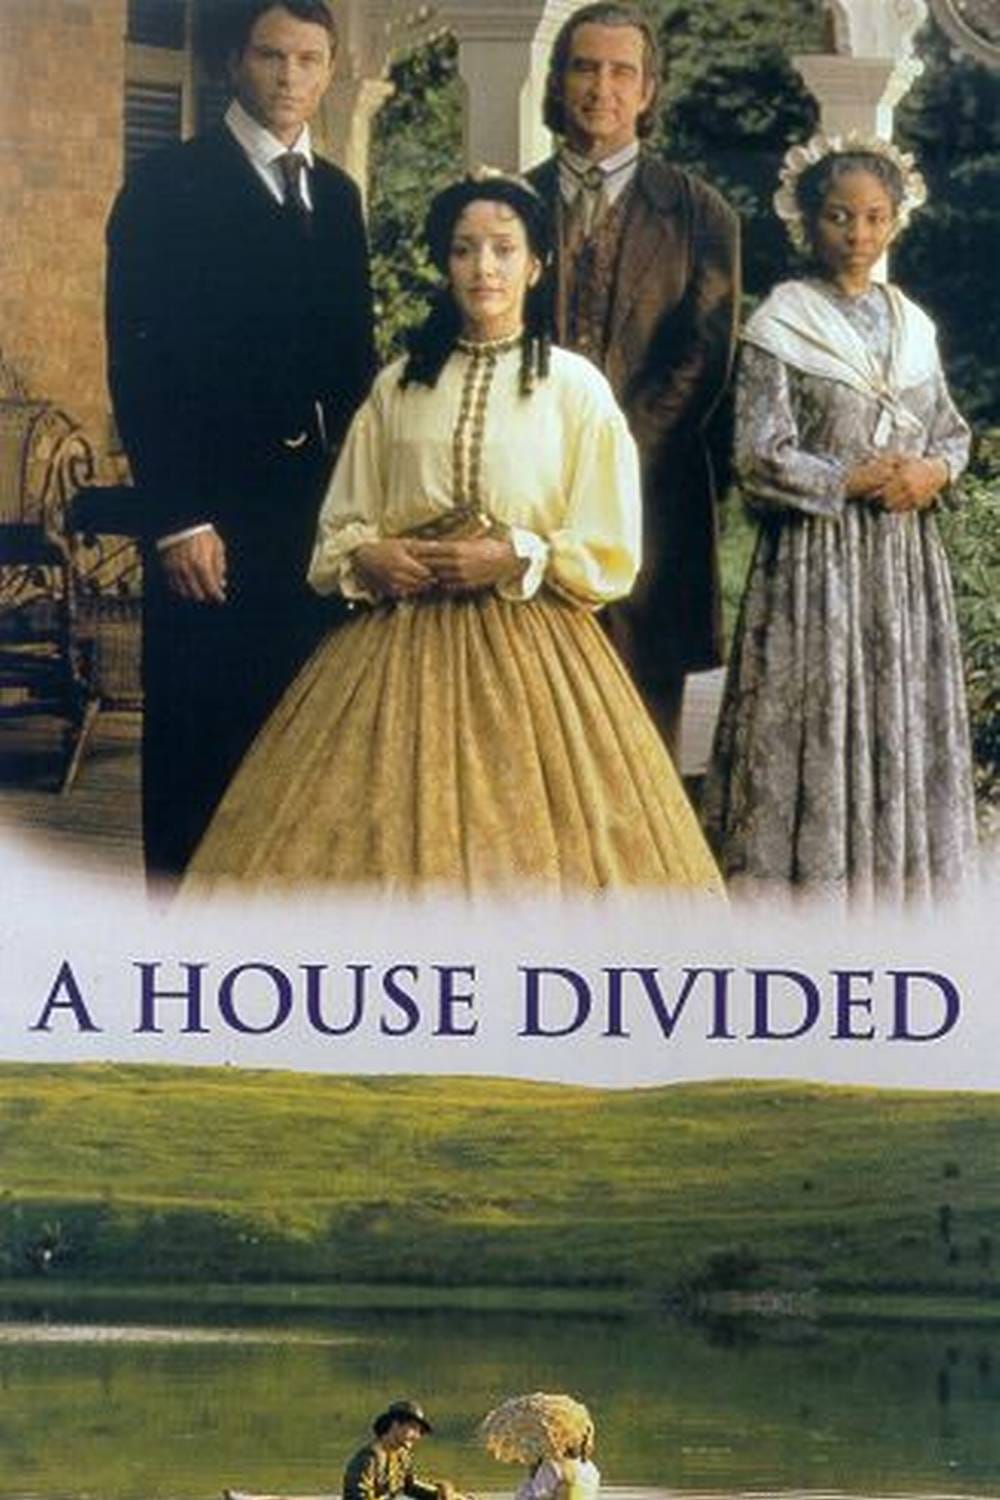 A House Divided (2000)